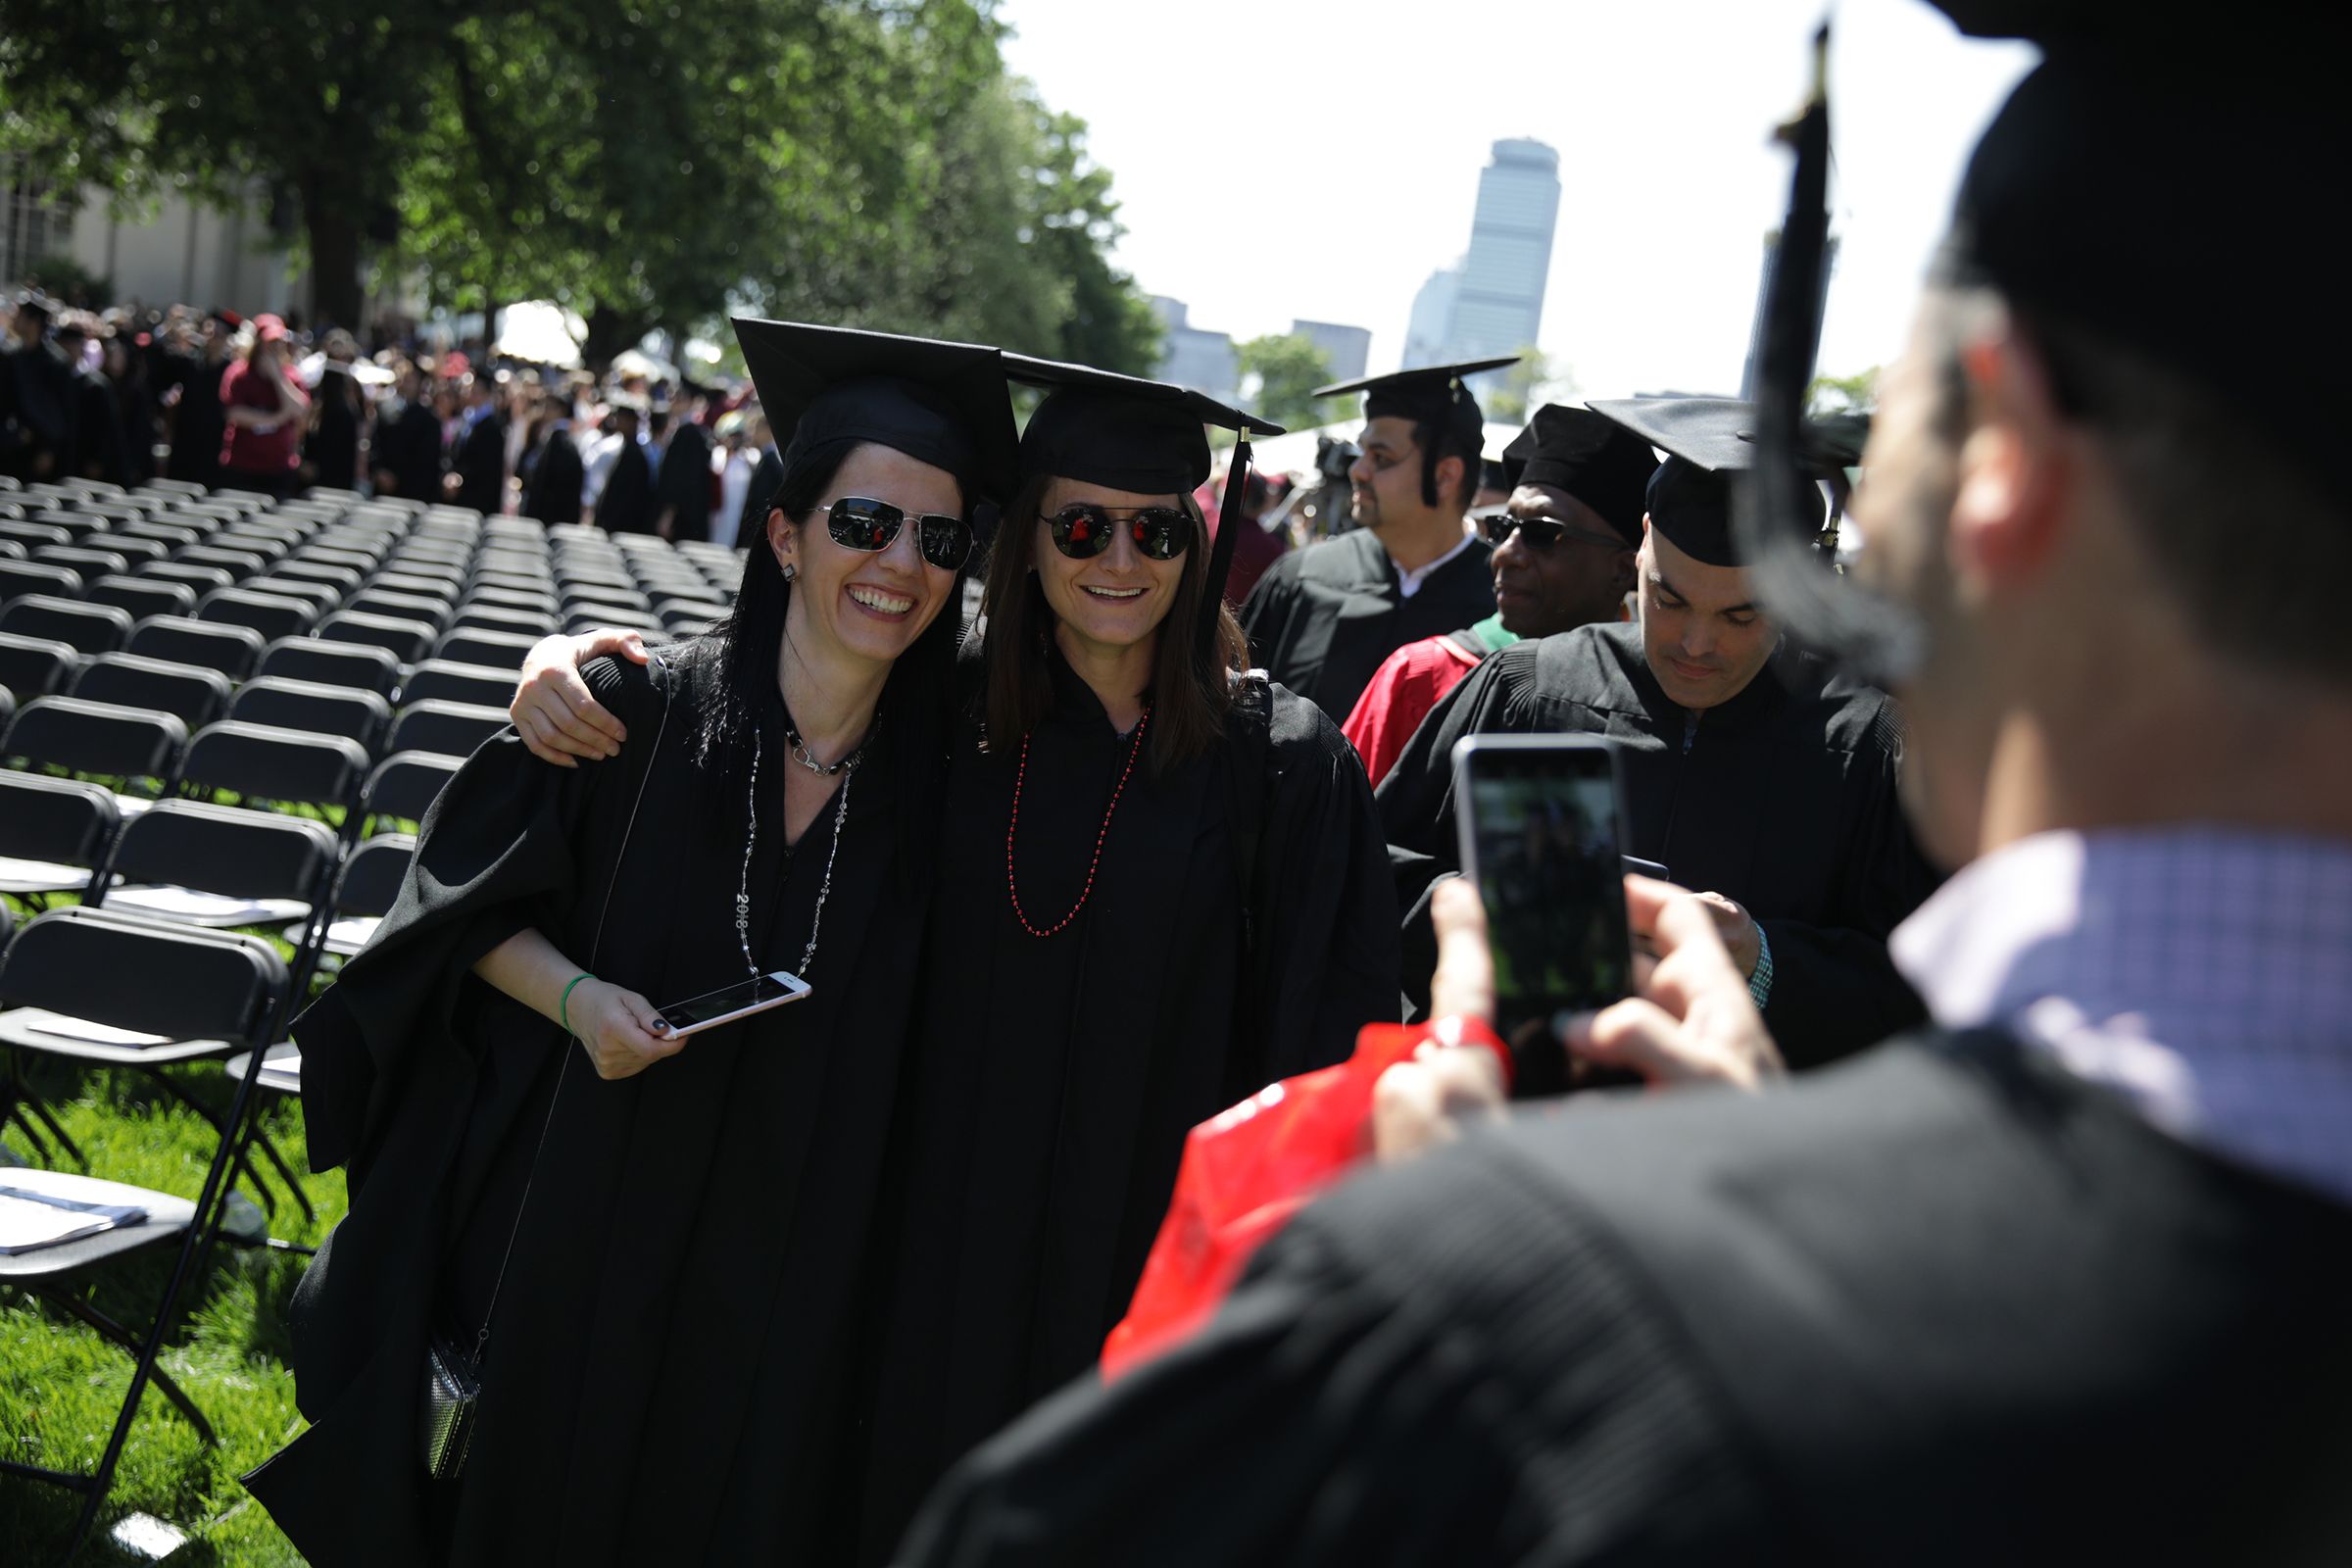 mit academic calendar 2021 Faculty Approve Proposal To Update Mit S Academic Calendar Commencement Timing Mit News Massachusetts Institute Of Technology mit academic calendar 2021